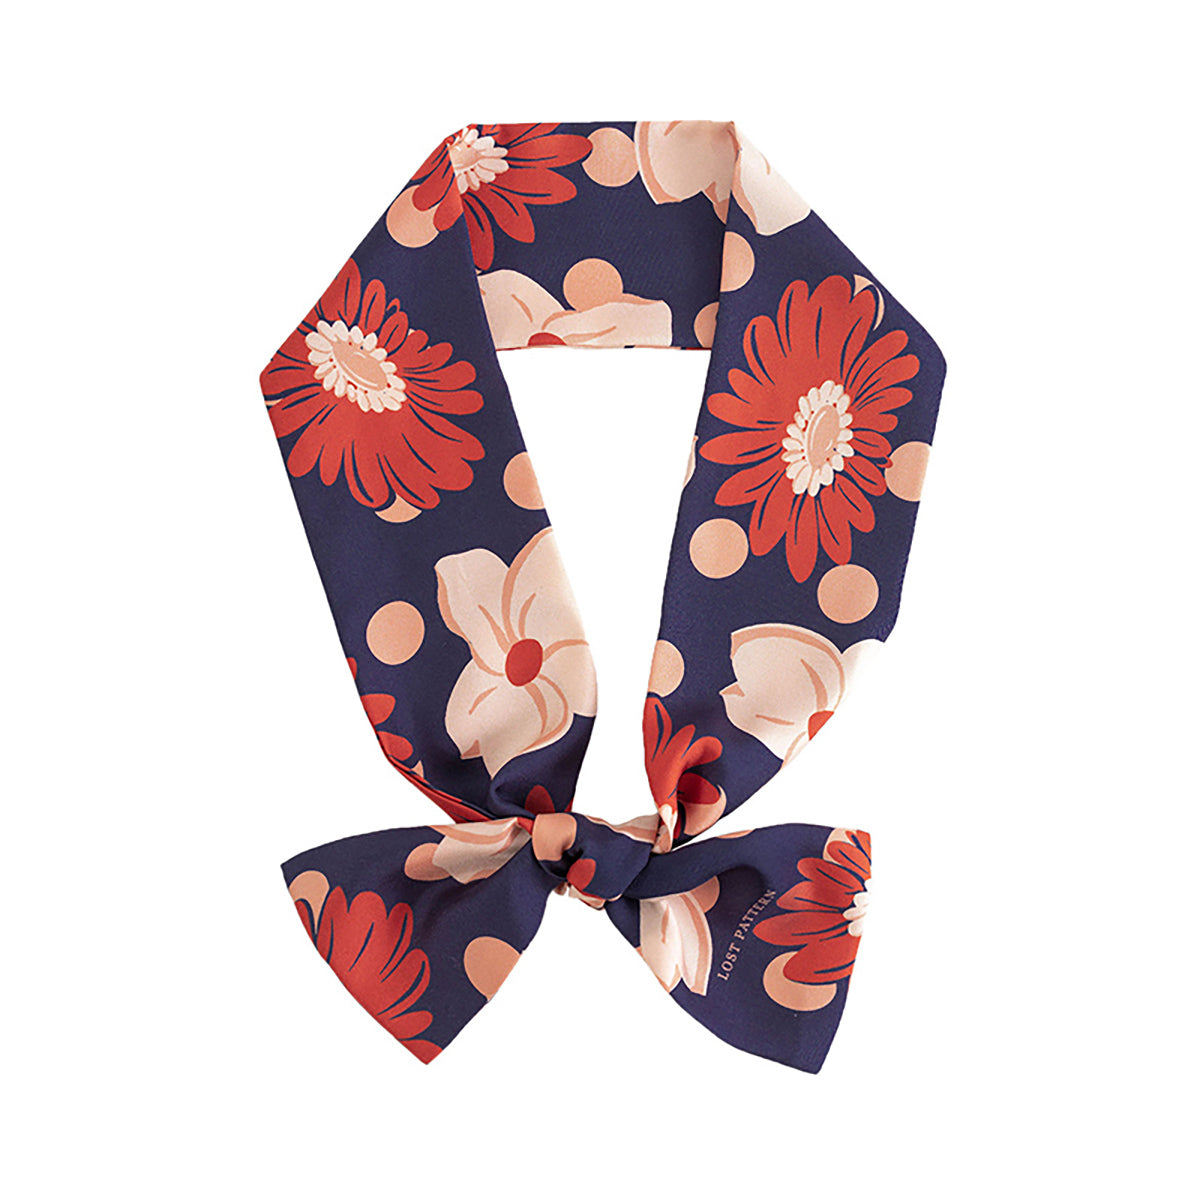 "Miss Daisy" Floral Silk Neck Scarf - Red & Blue - Red & Blue - LOST PATTERN Silk Skinny Scarf